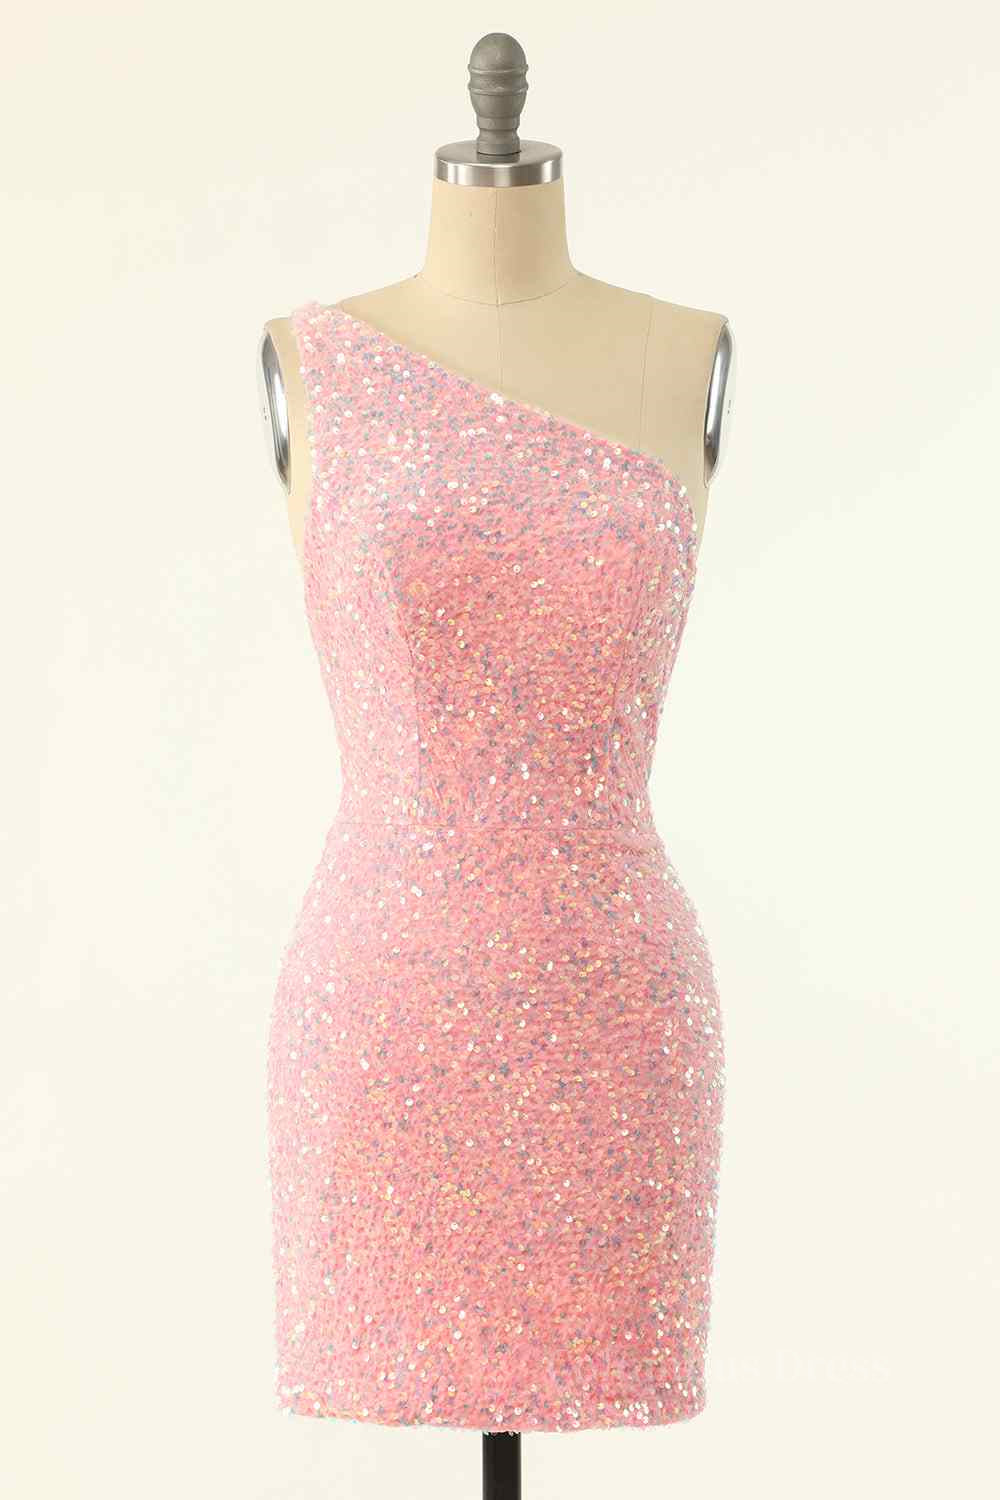 Pink Sheath One Shoulder Strap Back Sequins Mini Corset Homecoming Dress outfit, Formal Dress Stores